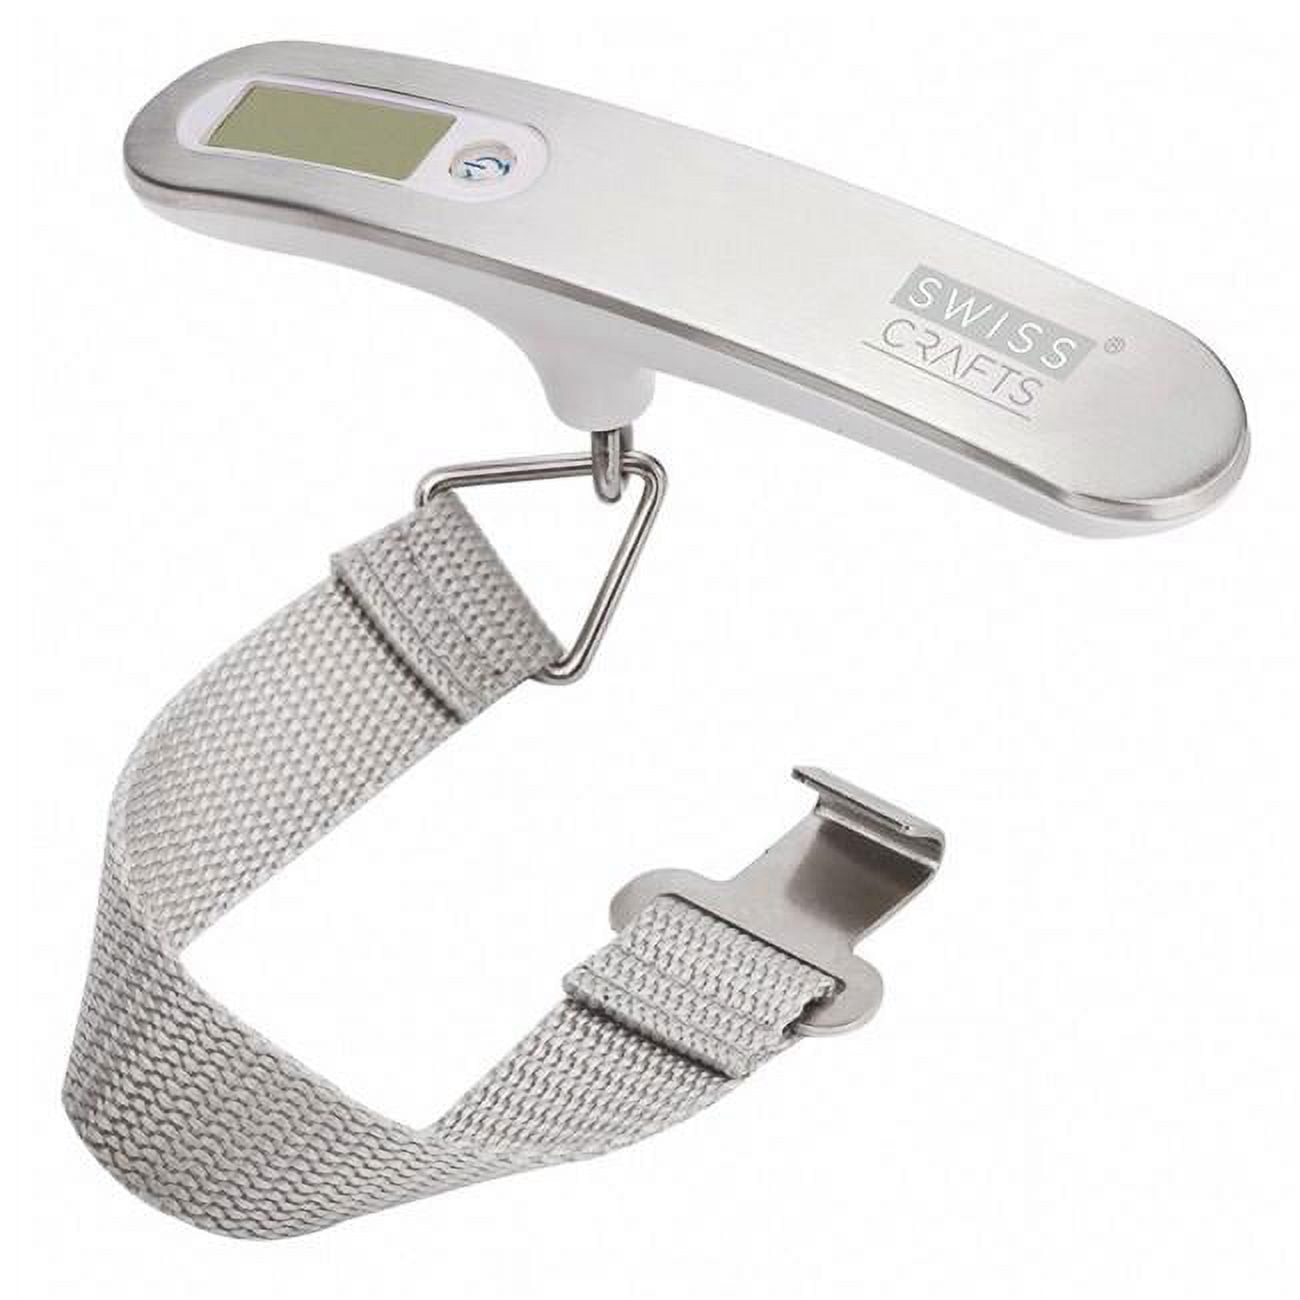 Pz4000slv Electric Luggage Scale - Stainless Steel